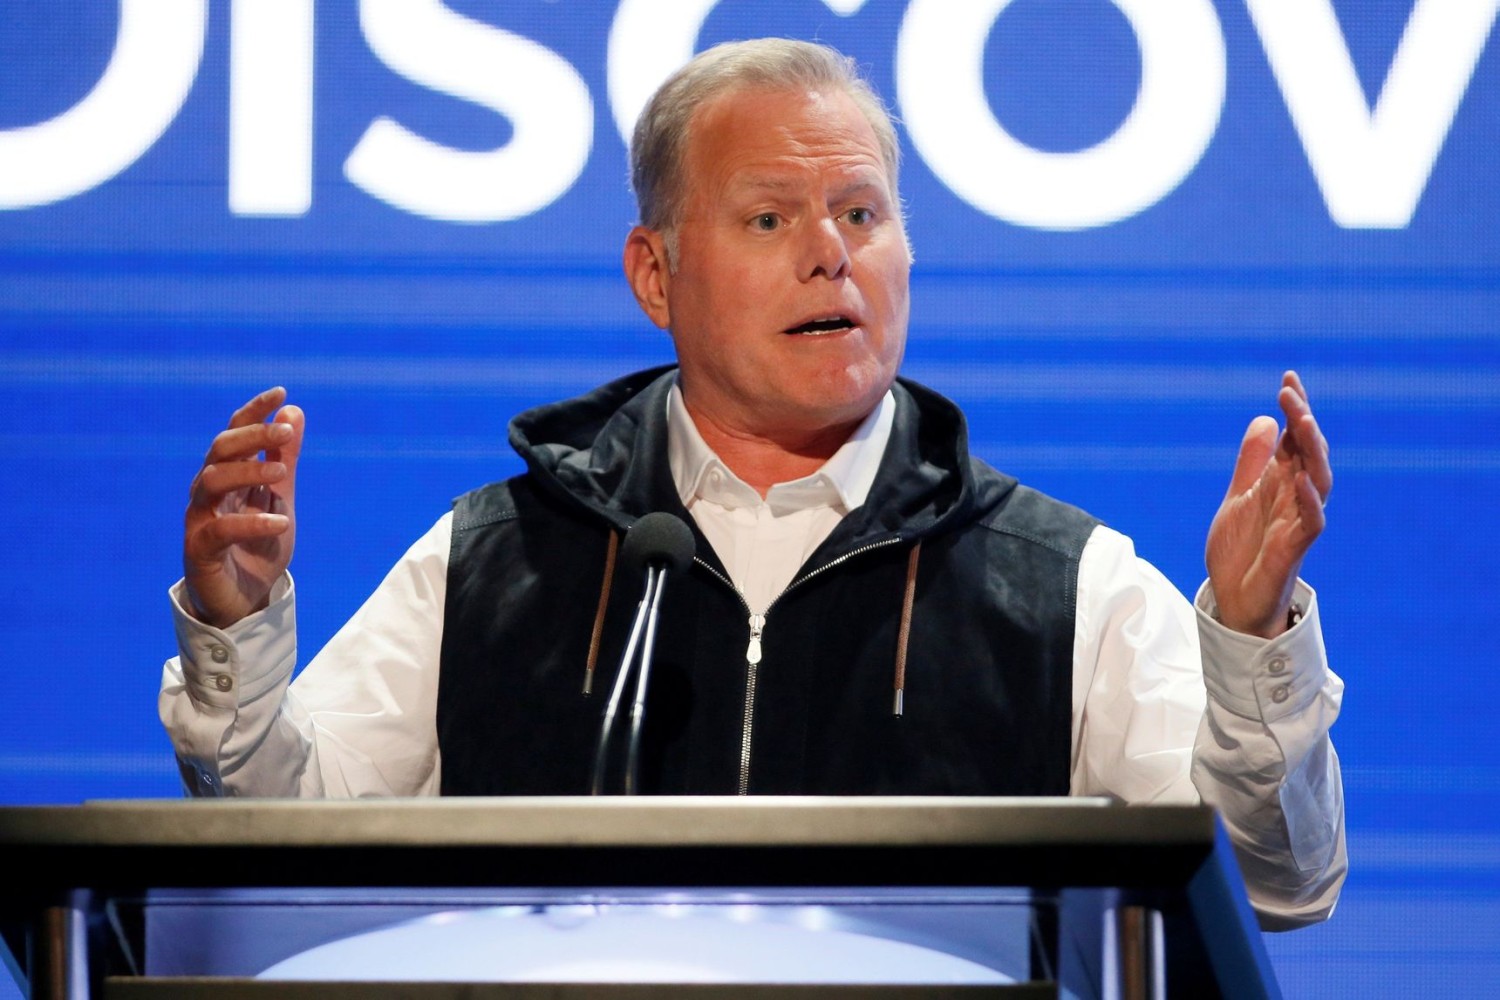 Around the time of the Discovery-WarnerMedia merger last year, Discovery CEO David Zaslav signed a new contract that runs through 2027, a securities filing shows. PHOTO: DANNY MOLOSHOK/REUTERS